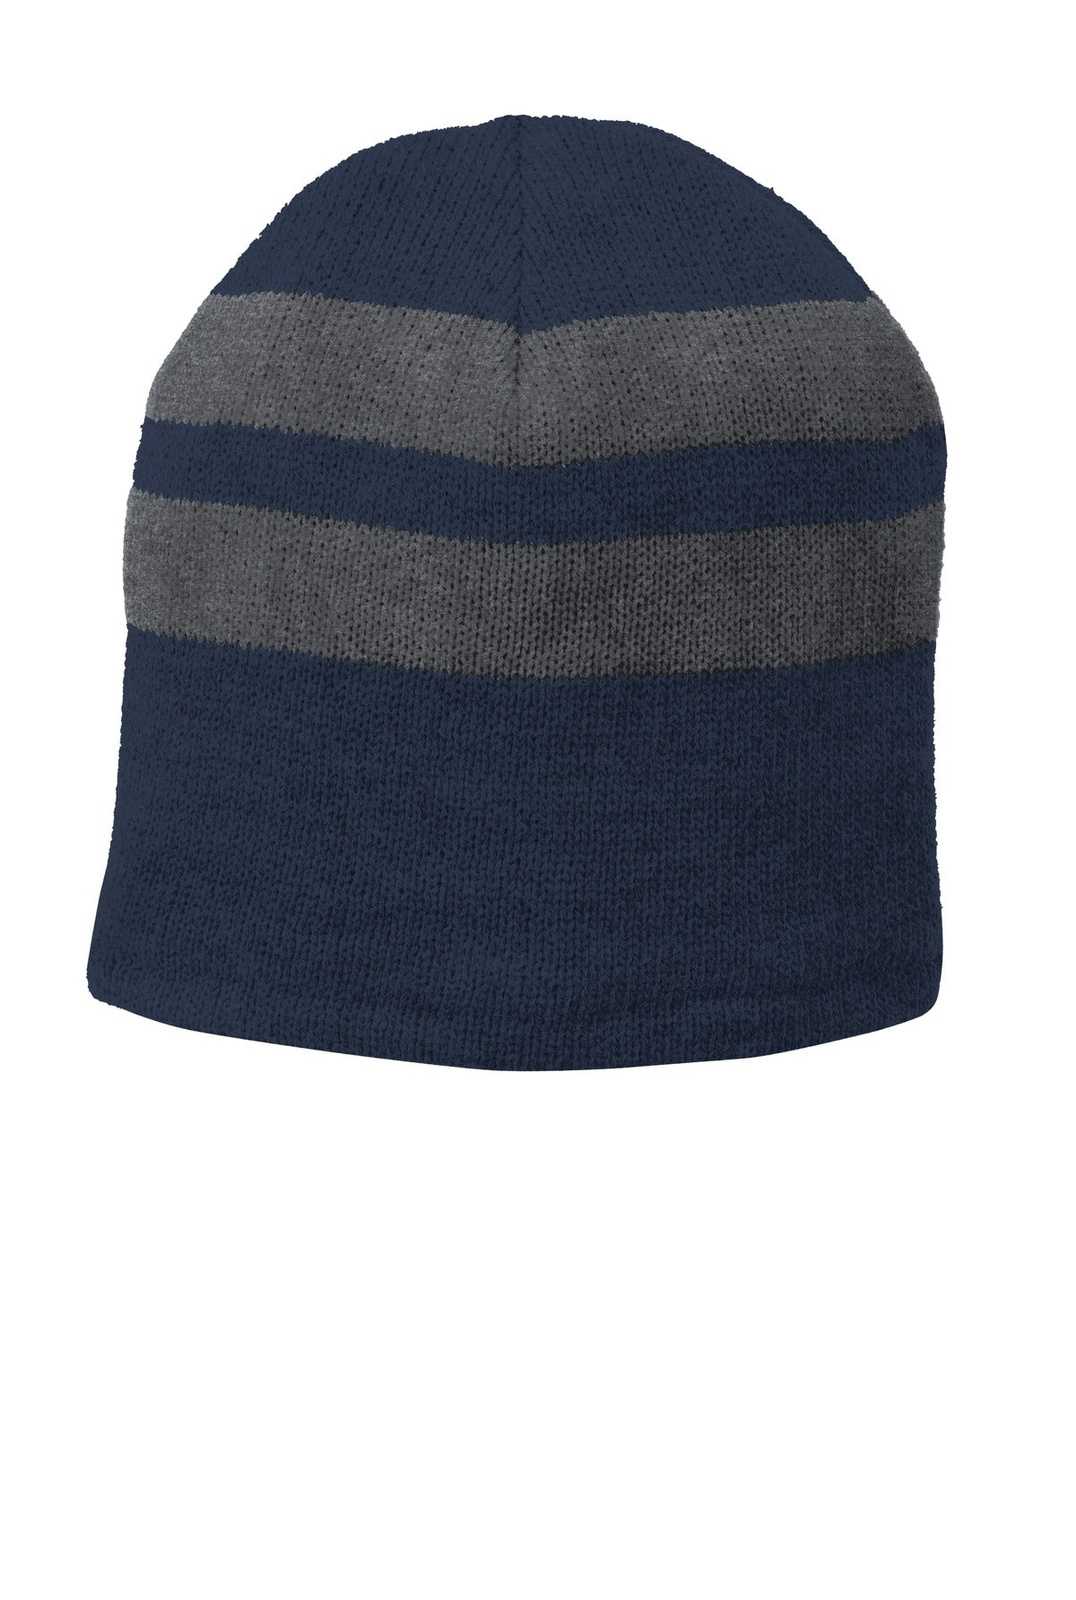 Port & Company C922 Fleece-Lined Striped Beanie Cap - Navy Athletic Oxford - HIT a Double - 1